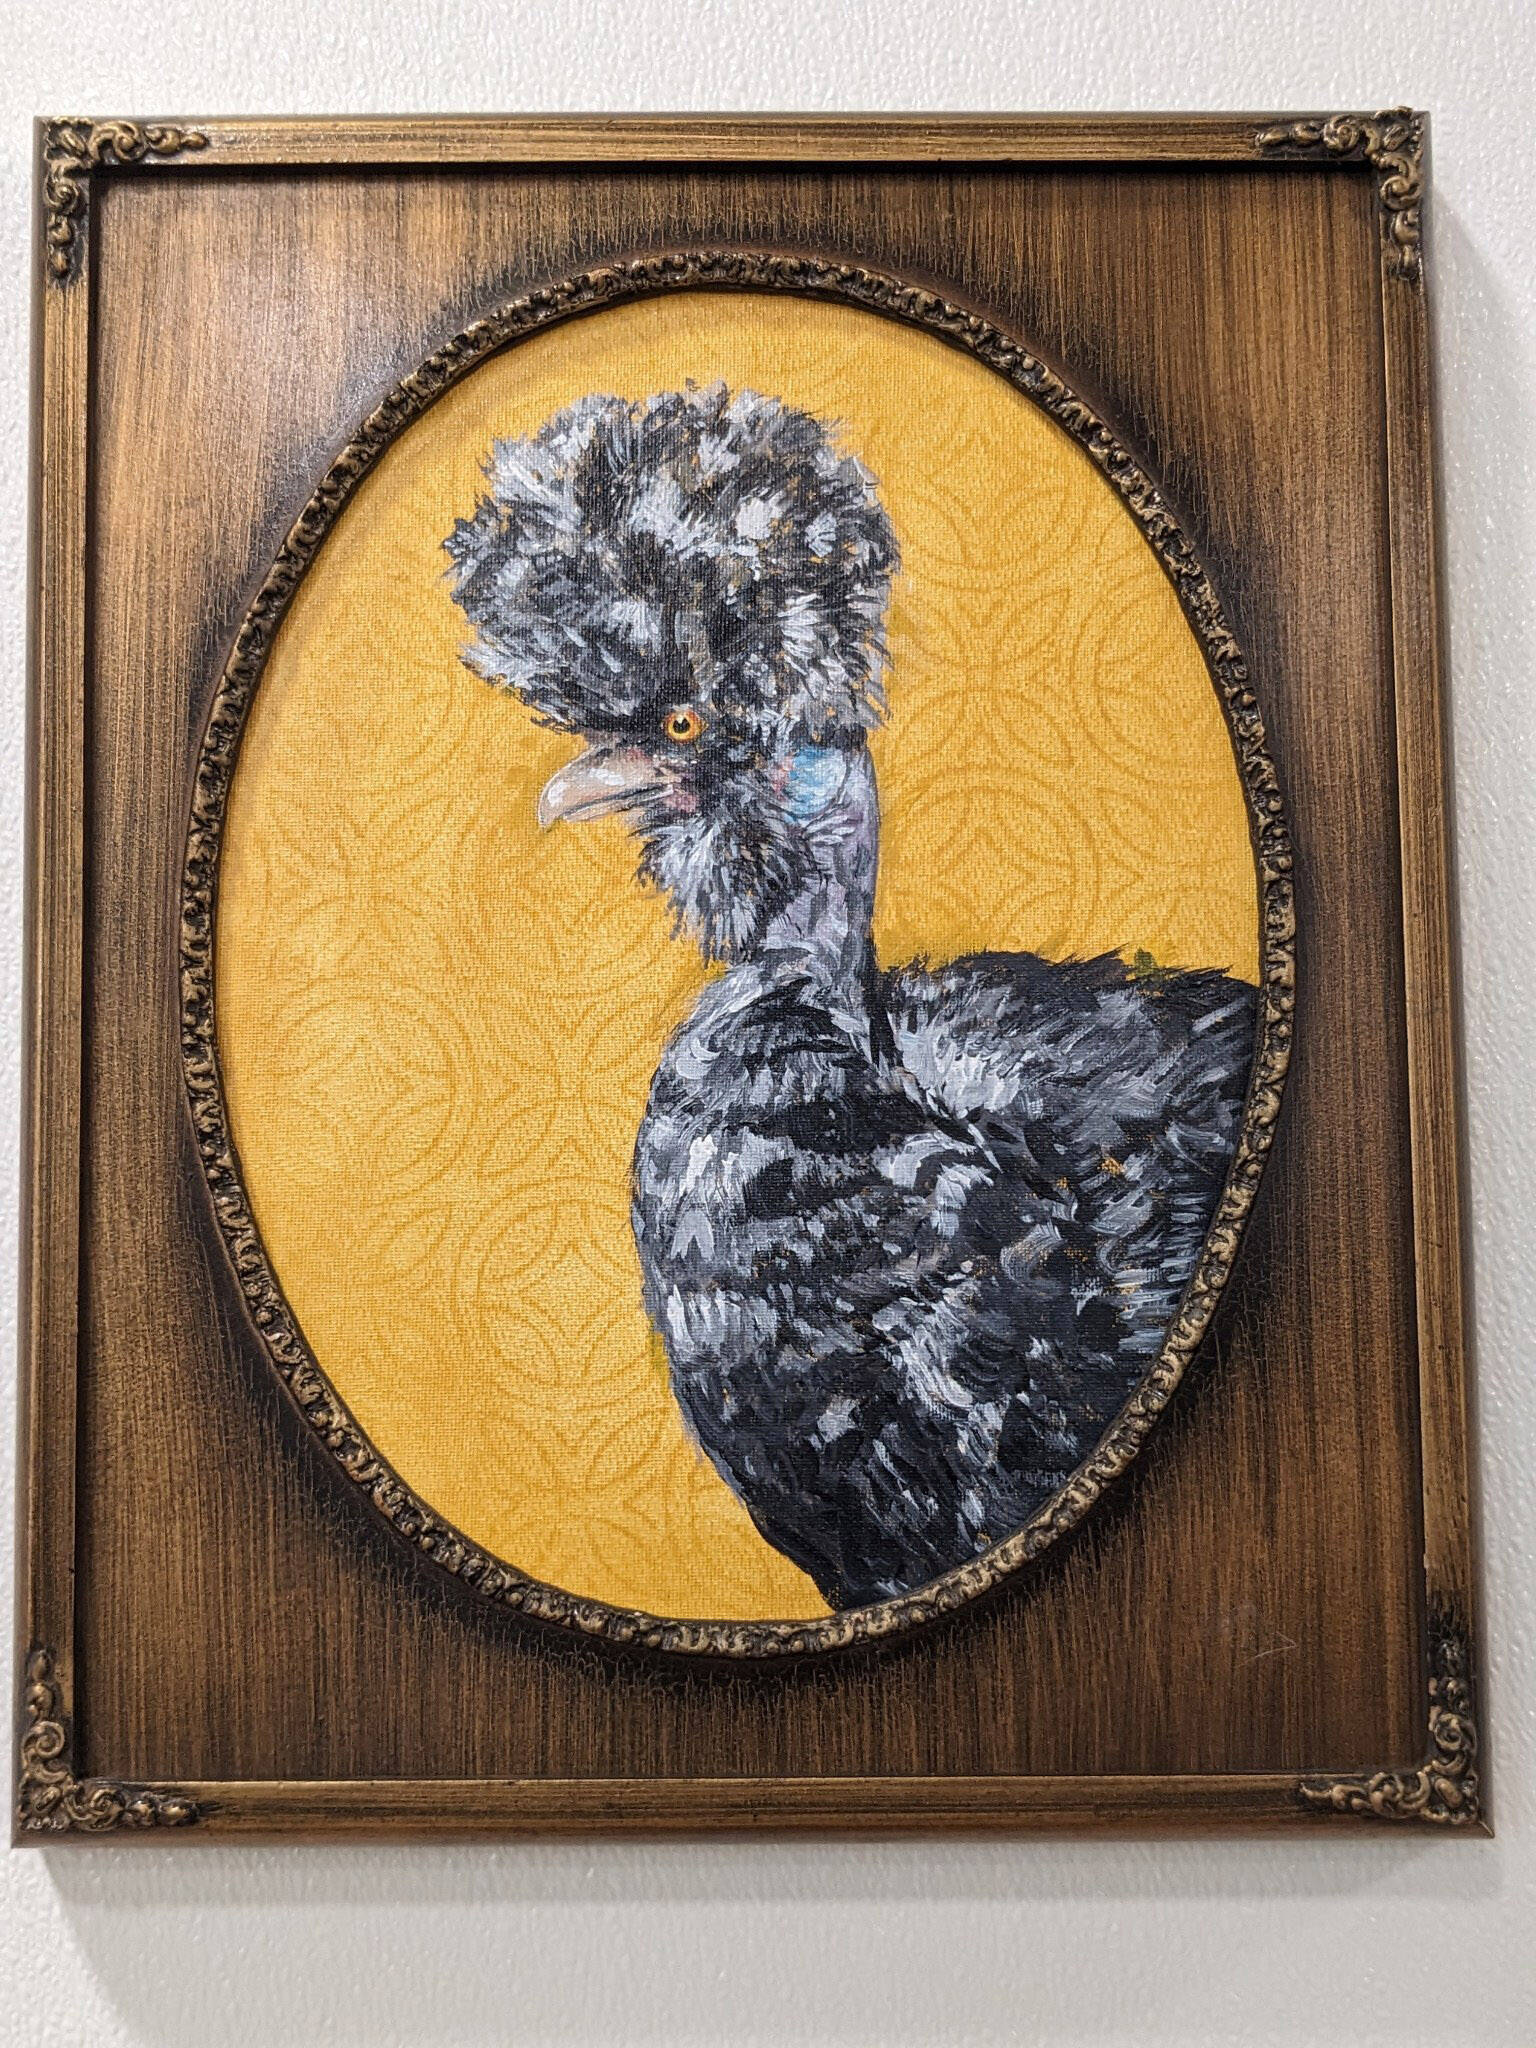 Photo provided by Julianne Tomich
“Pearl,” an acrylic and coffee painting in a refurbished frame by Julianne Tomich, is one of the “Pandemic Chickens” on exhibit at Grace Ridge Brewing through January.